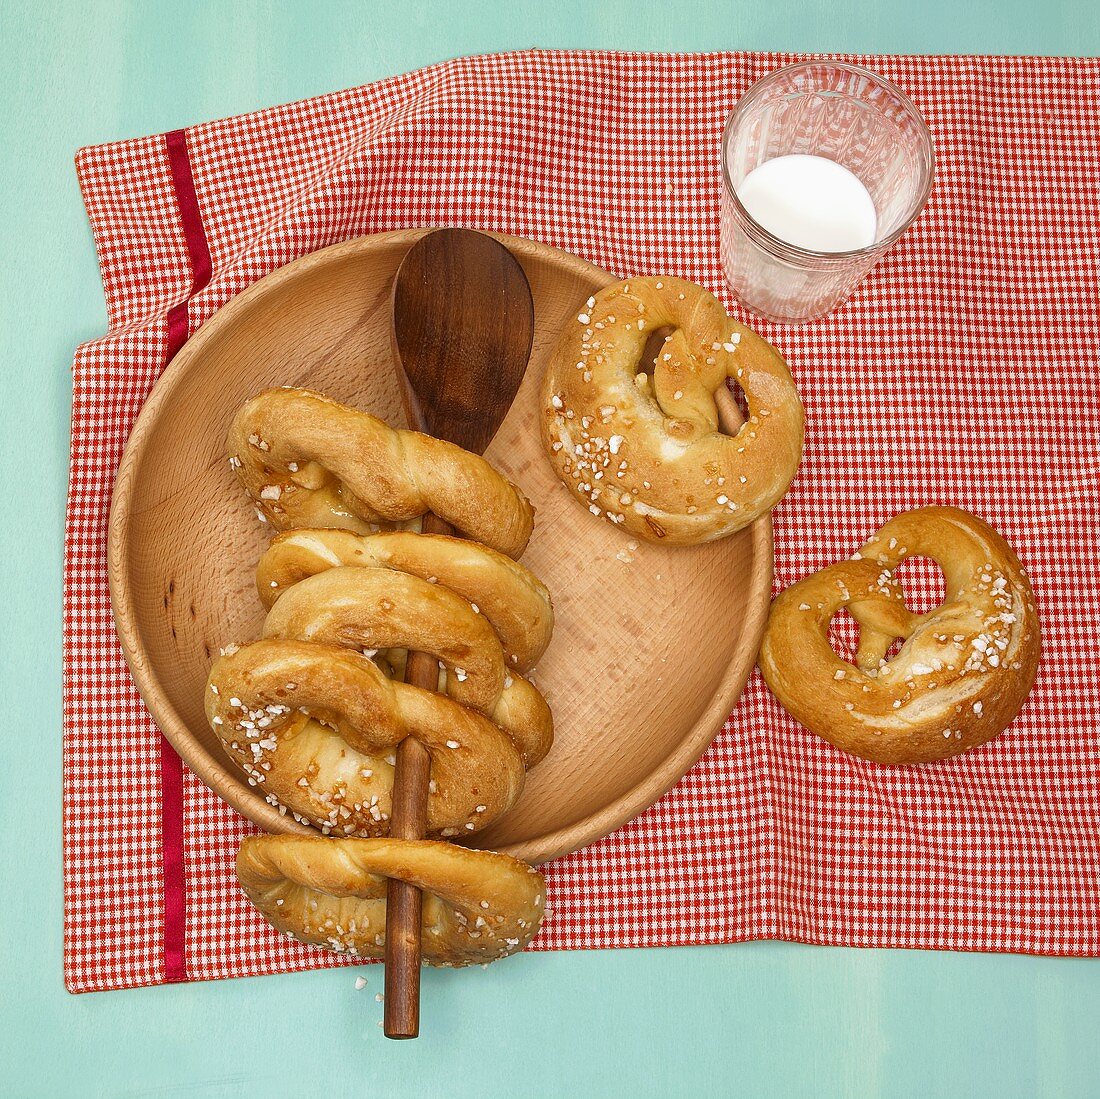 Pretzels on wooden plate and wooden spoon